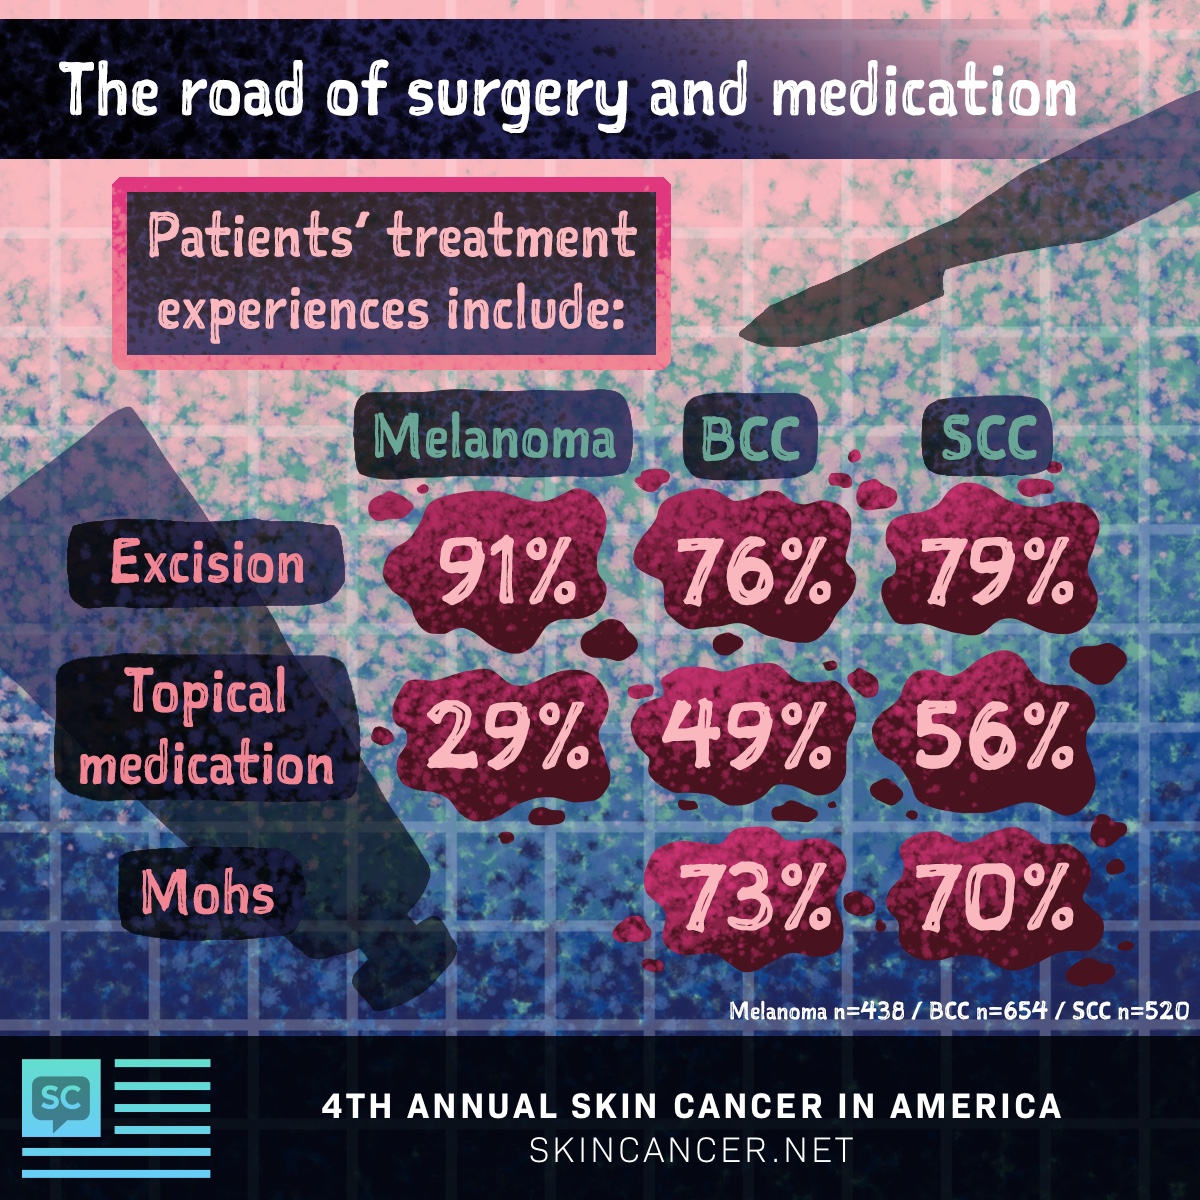 SkinCancer.net 2020 In America survey results, 73% of BCC and 70% of SCC patients’ treatment experience included Mohs surgery.